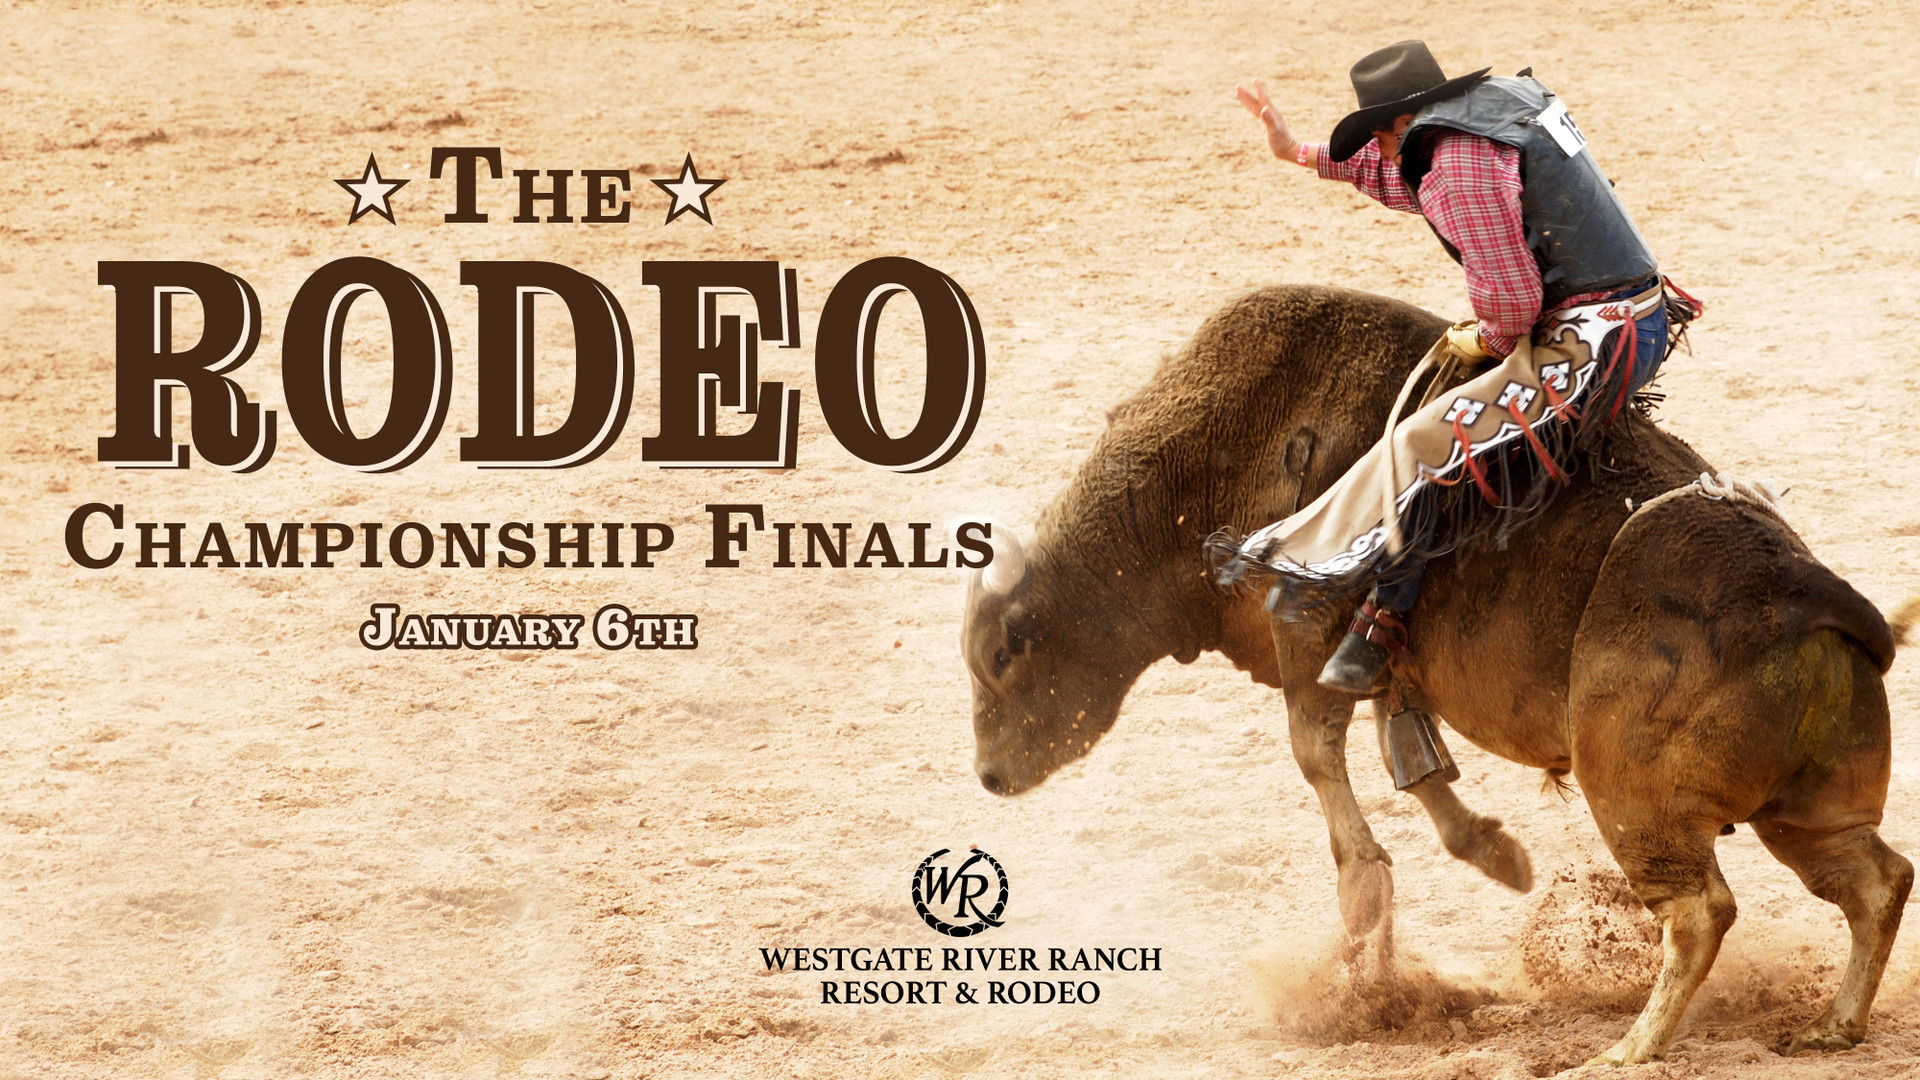 Westgate River Ranch Resort & Rodeo Presents the Third Annual World of Westgate Pro Rodeo Championsh